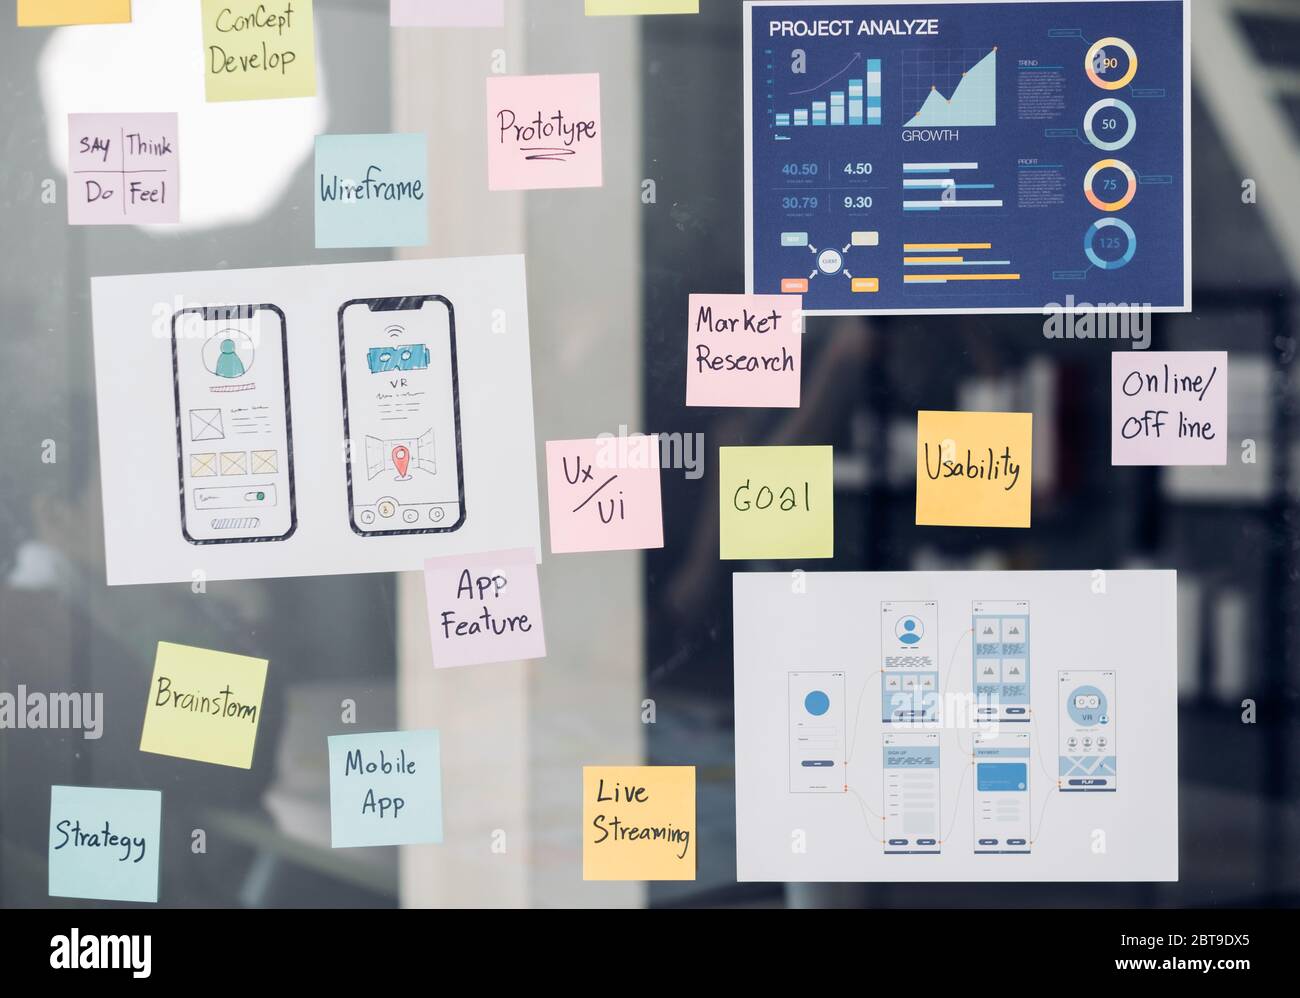 close up ux/ui prototype design and business strategy plan for develop mobile app on clear brainstorming white board in digital design agency company Stock Photo